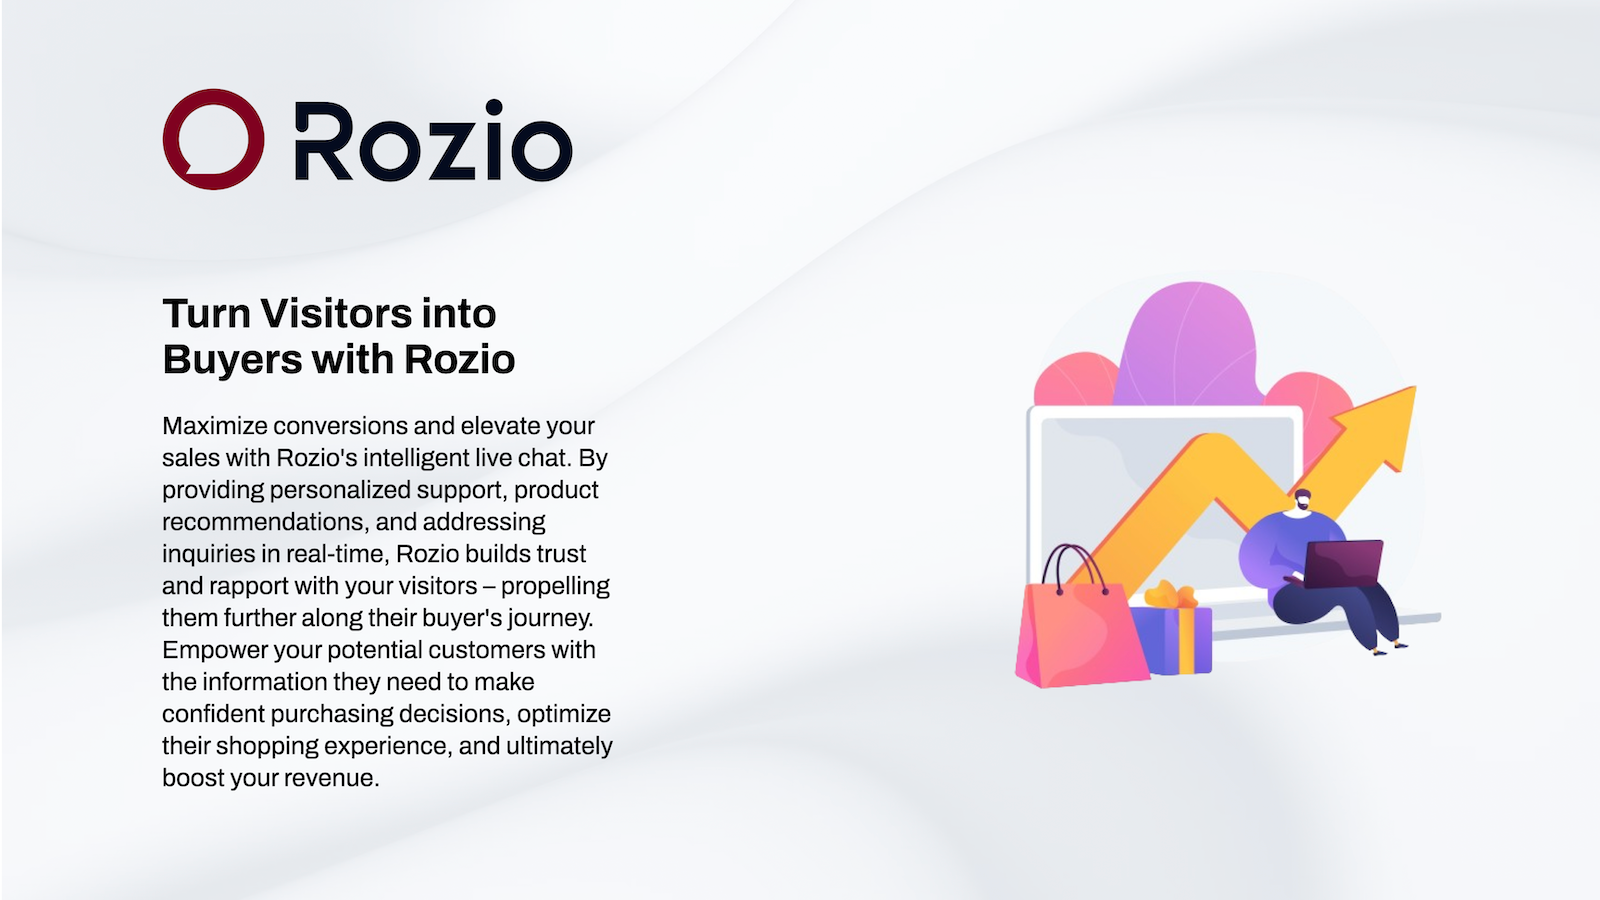 Rozio chat: Driving sales and converting visitors